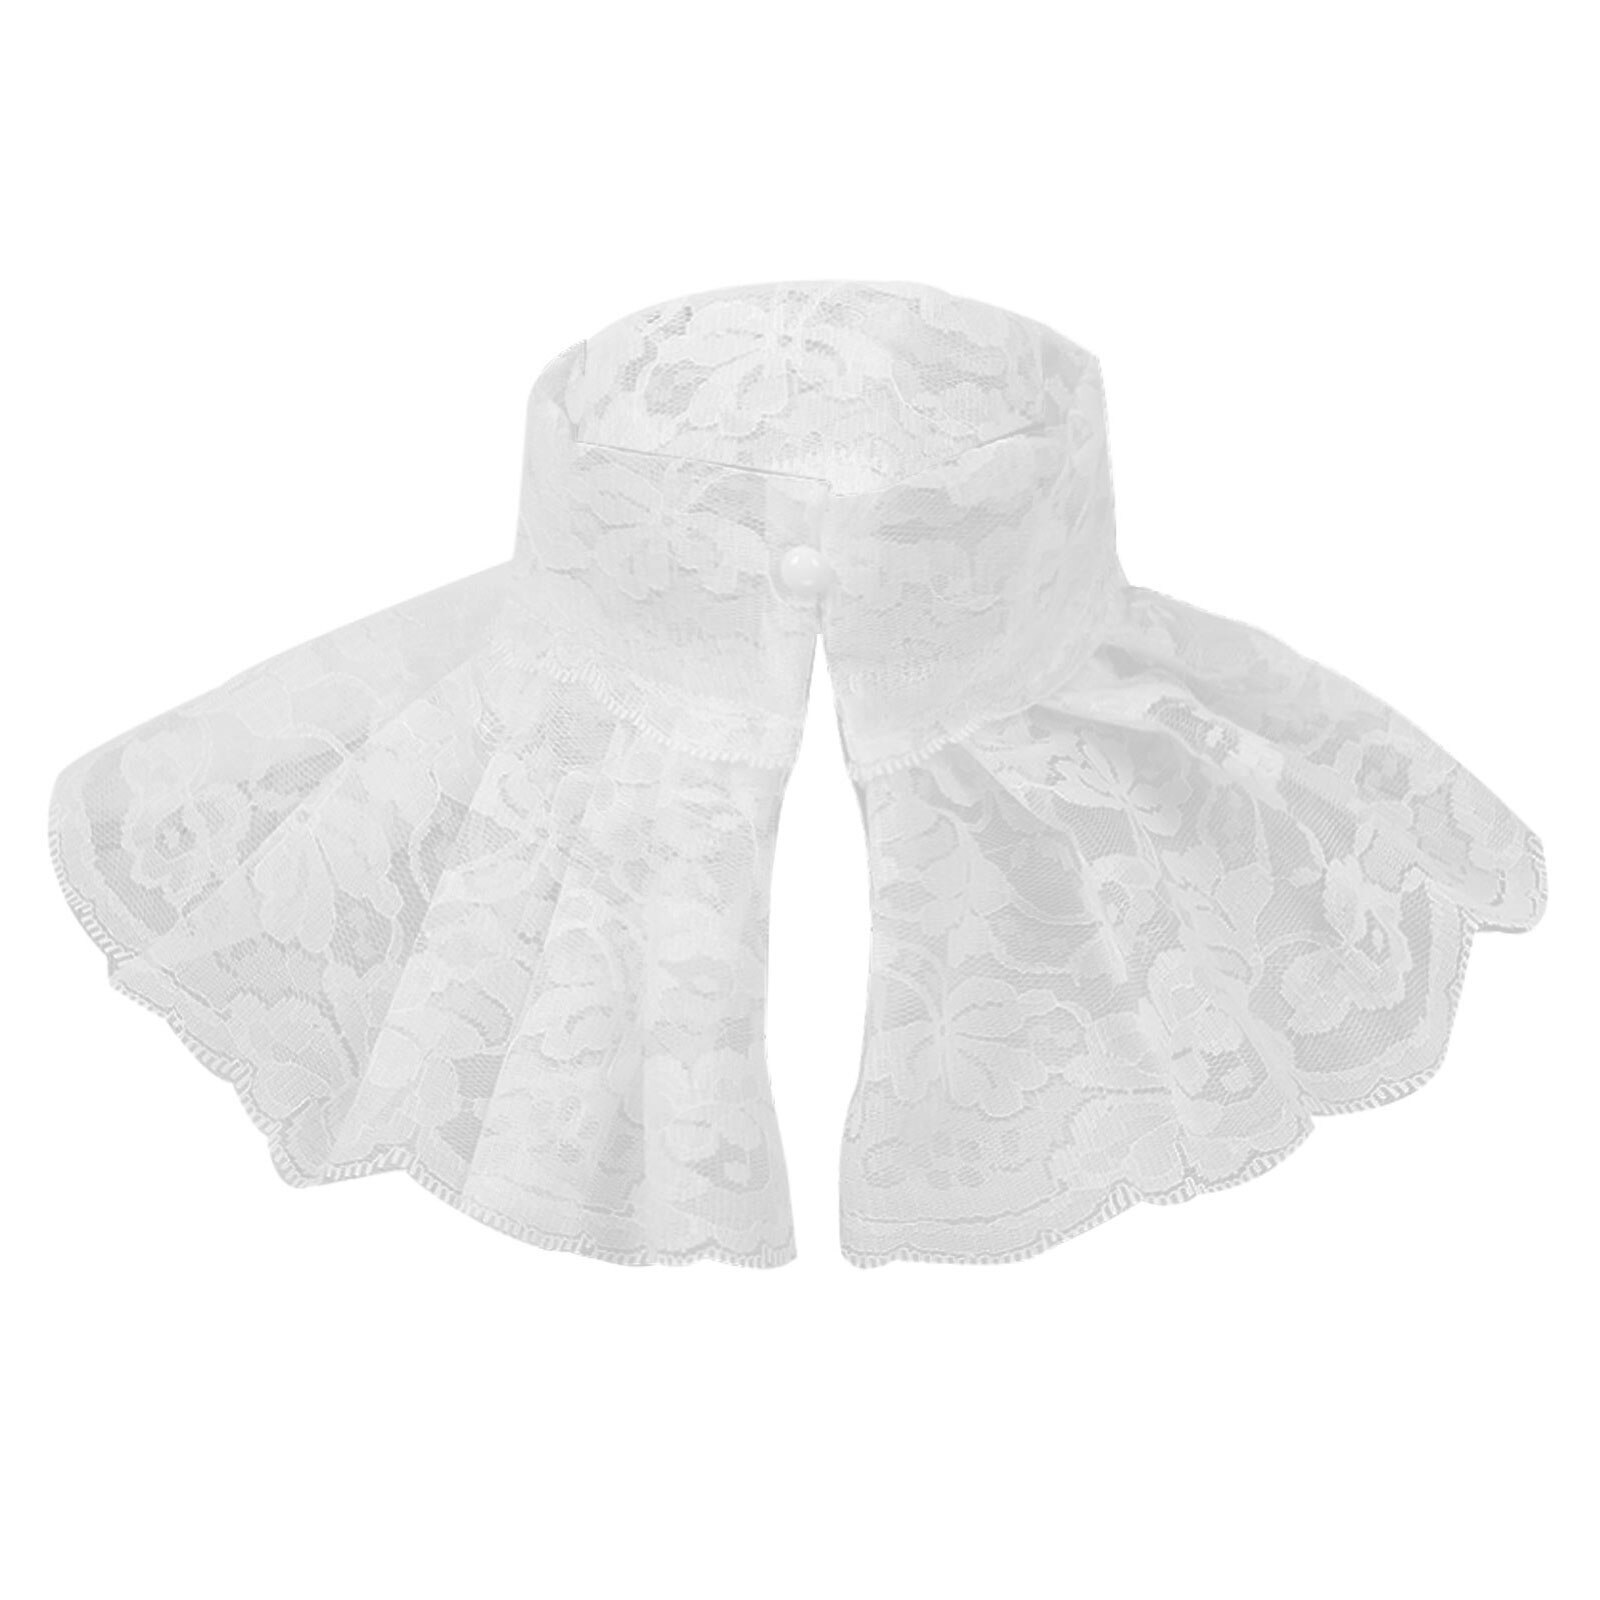 Women Sheer Lace Collar Victorian Renaissance Detachable Collar Ruffled Lace High Neck Collar Stage Party Shirt Dress Costume: White